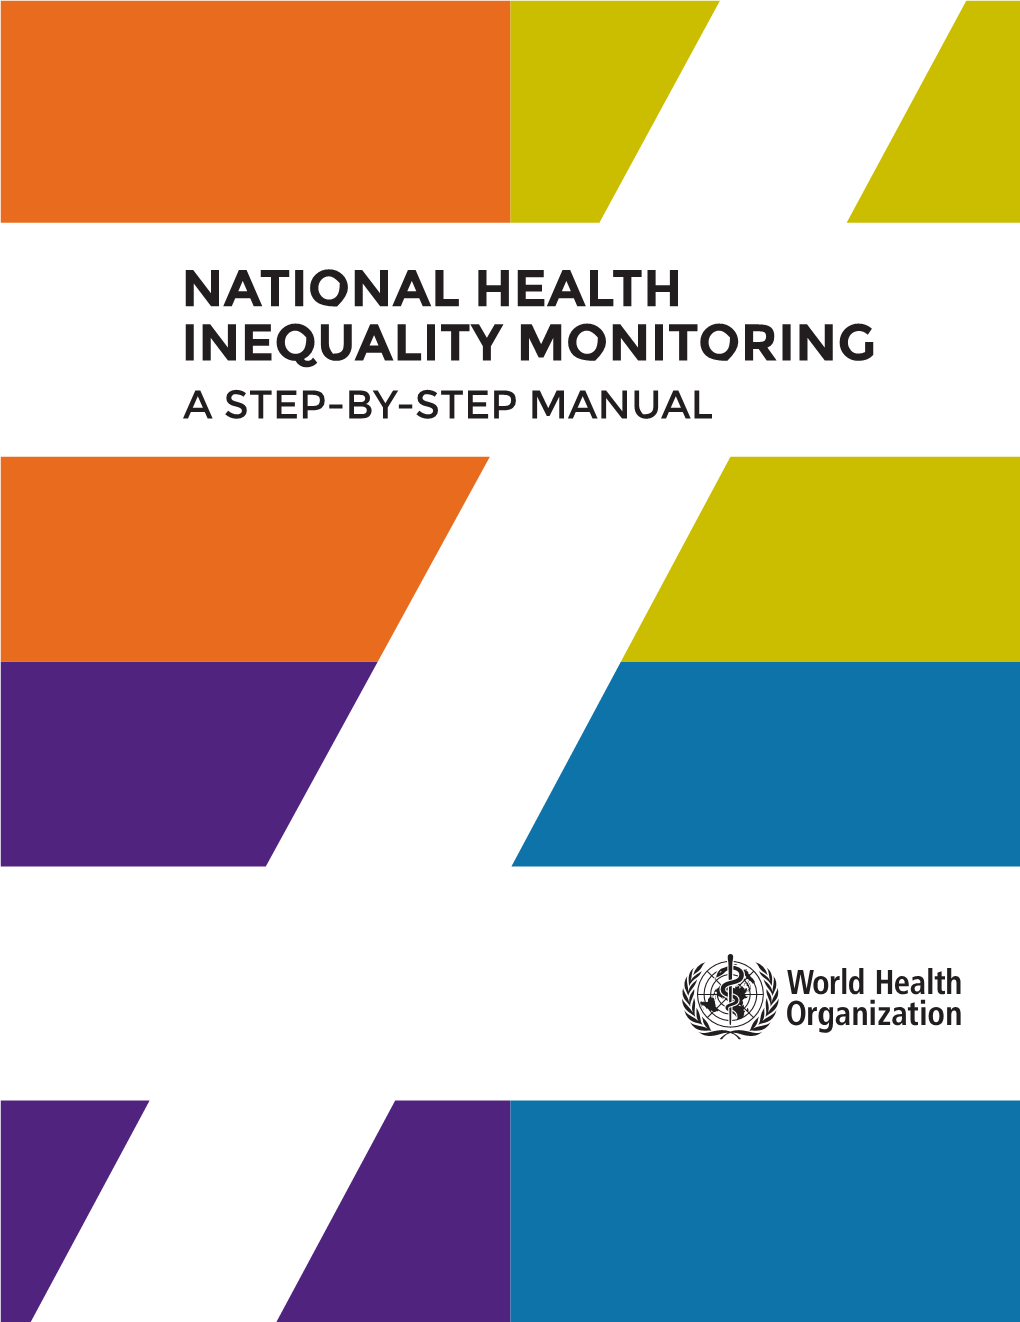 National Health Inequality Monitoring: a Step-By-Step Manual